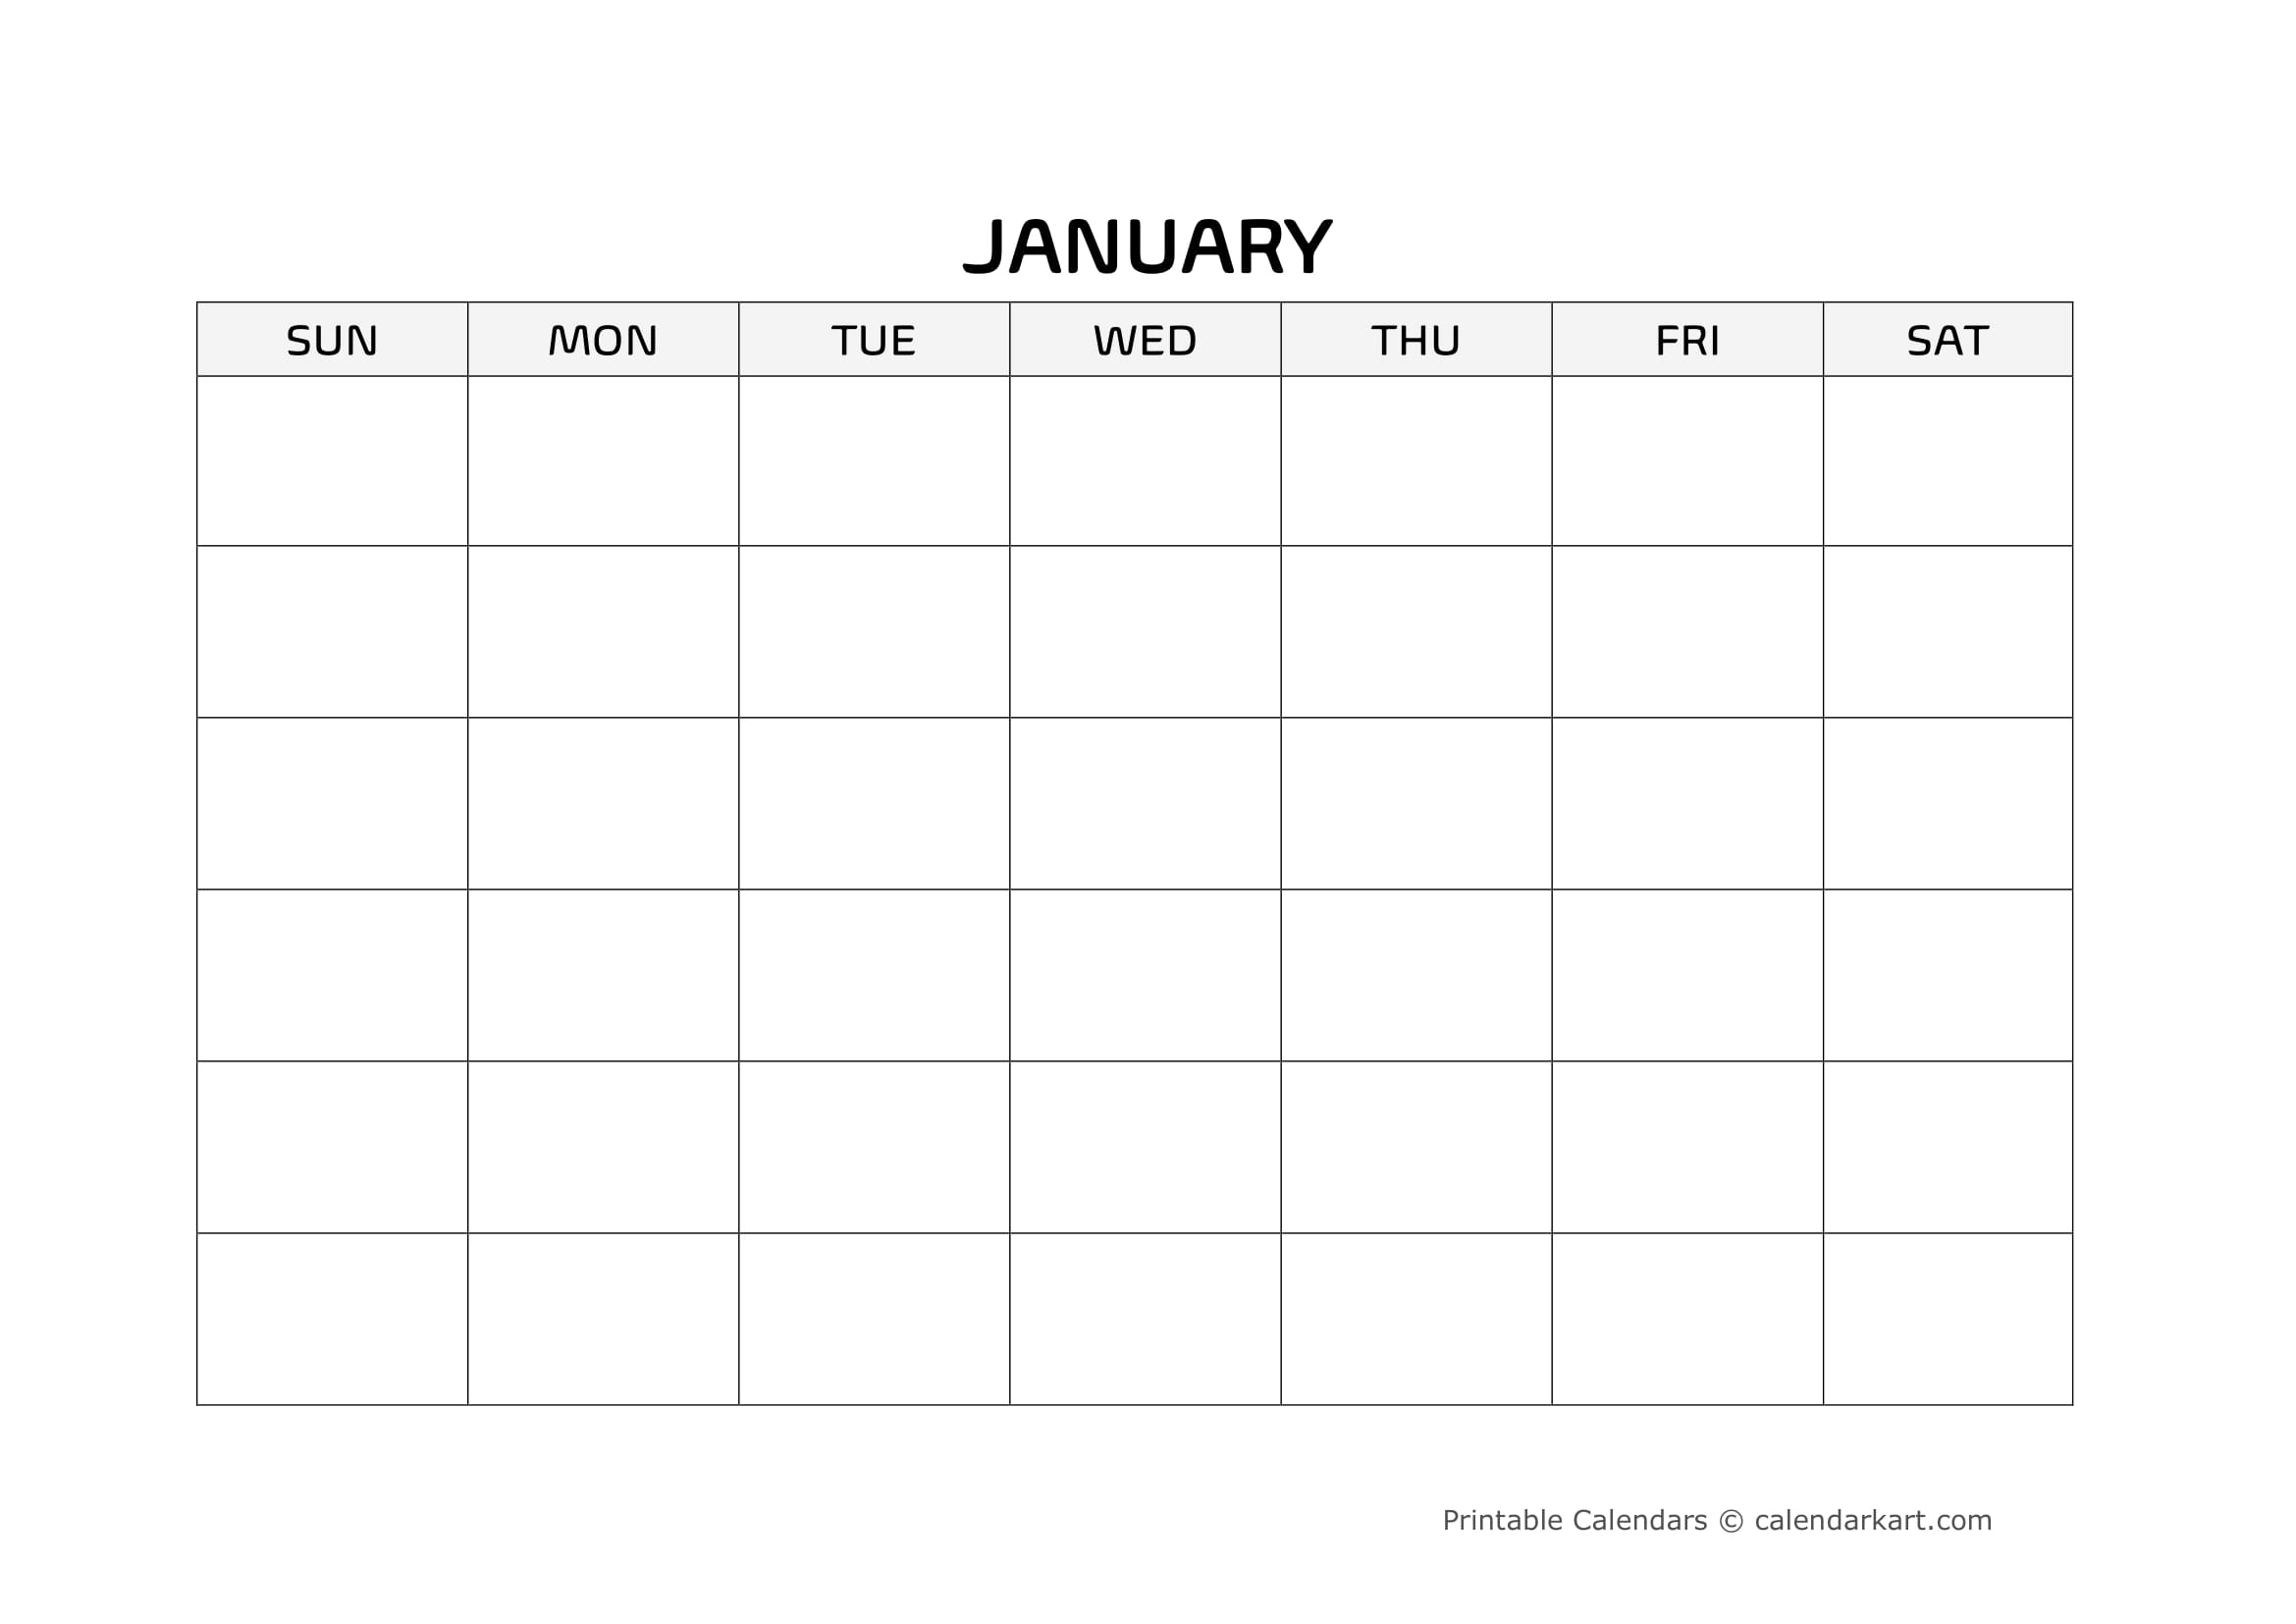 10+ Free Printable Blank Calendar Templates (Undated) - Pertaining To Blank Calender Template